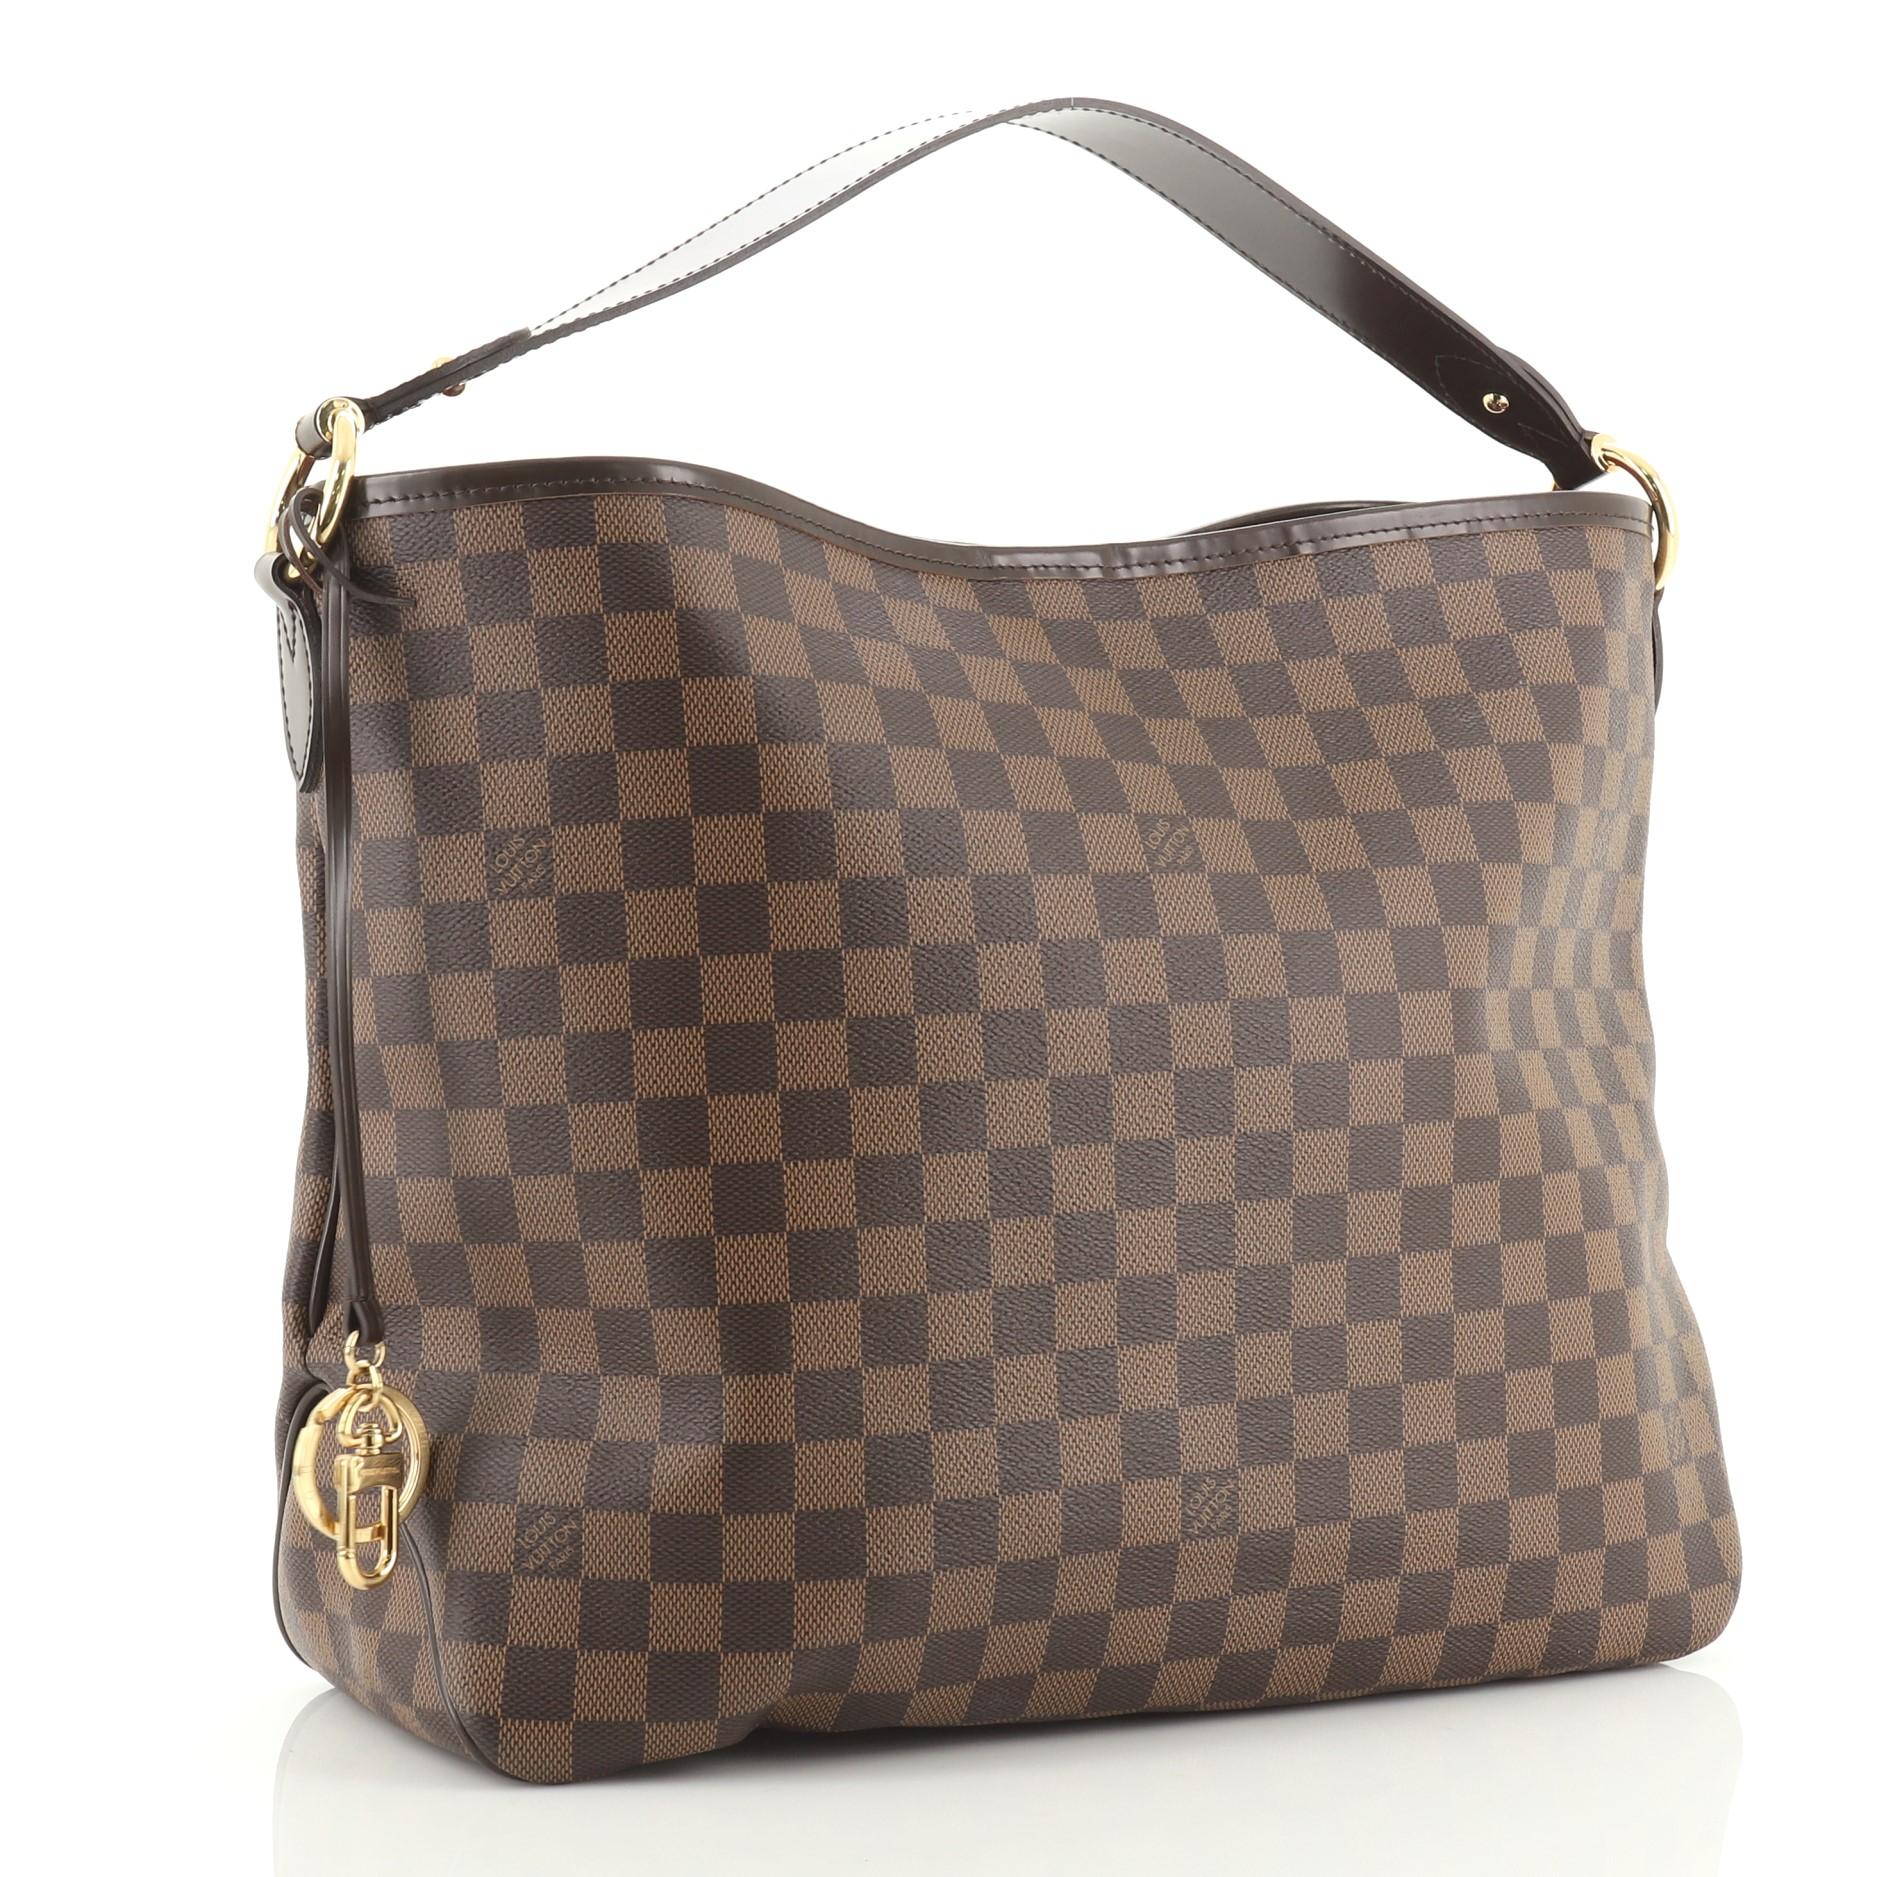 This Louis Vuitton Delightful NM Handbag Damier MM is a versatile hobo that can be used every day. Crafted in Damier ebene coated canvas, this bag features a flat leather handle and gold-tone hardware. Its hook closure opens to a red fabric interior